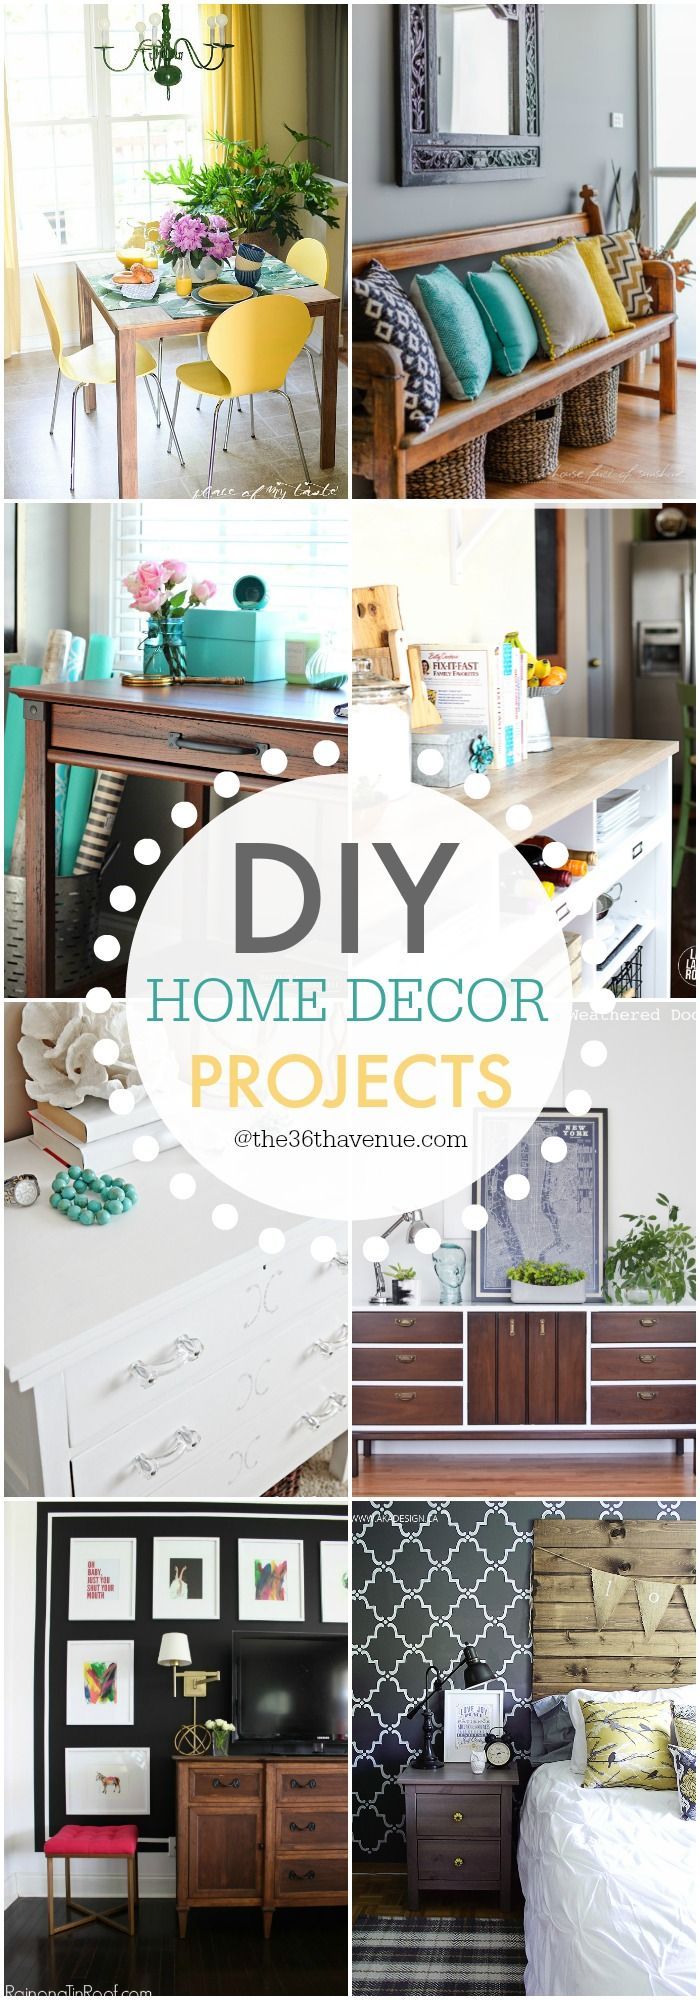 DIY Home Decor Projects and Ideas